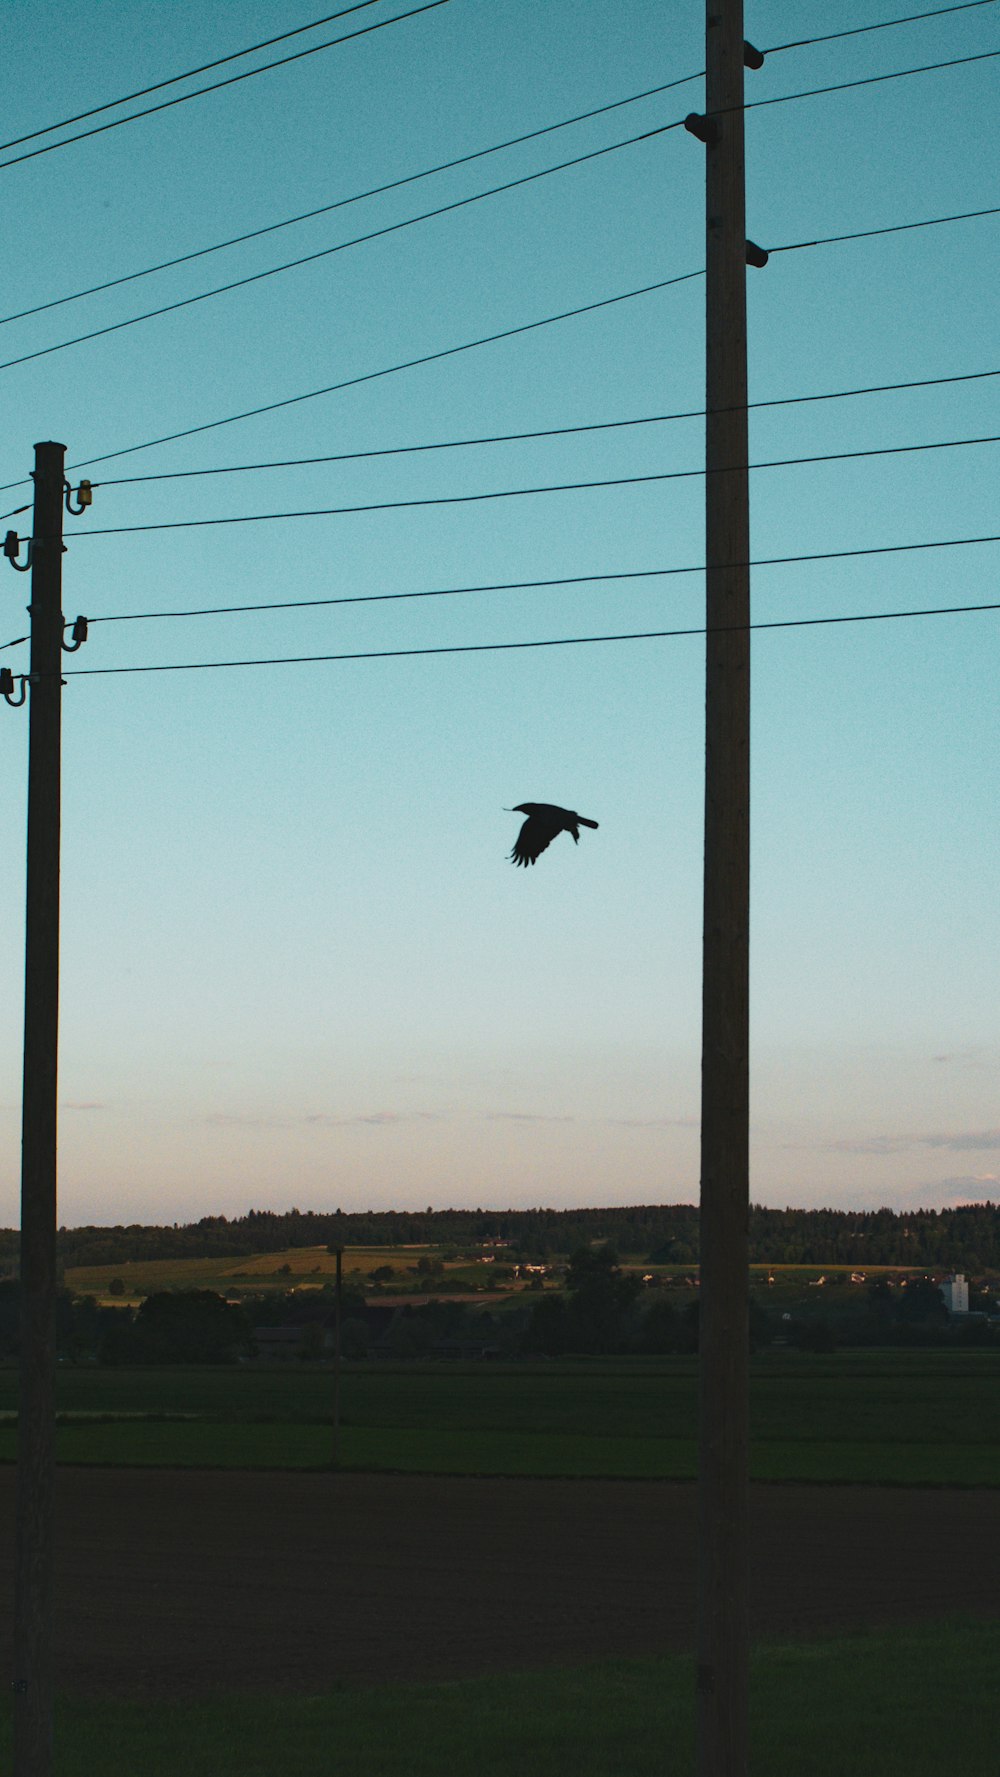 a large bird flying over a field under power lines